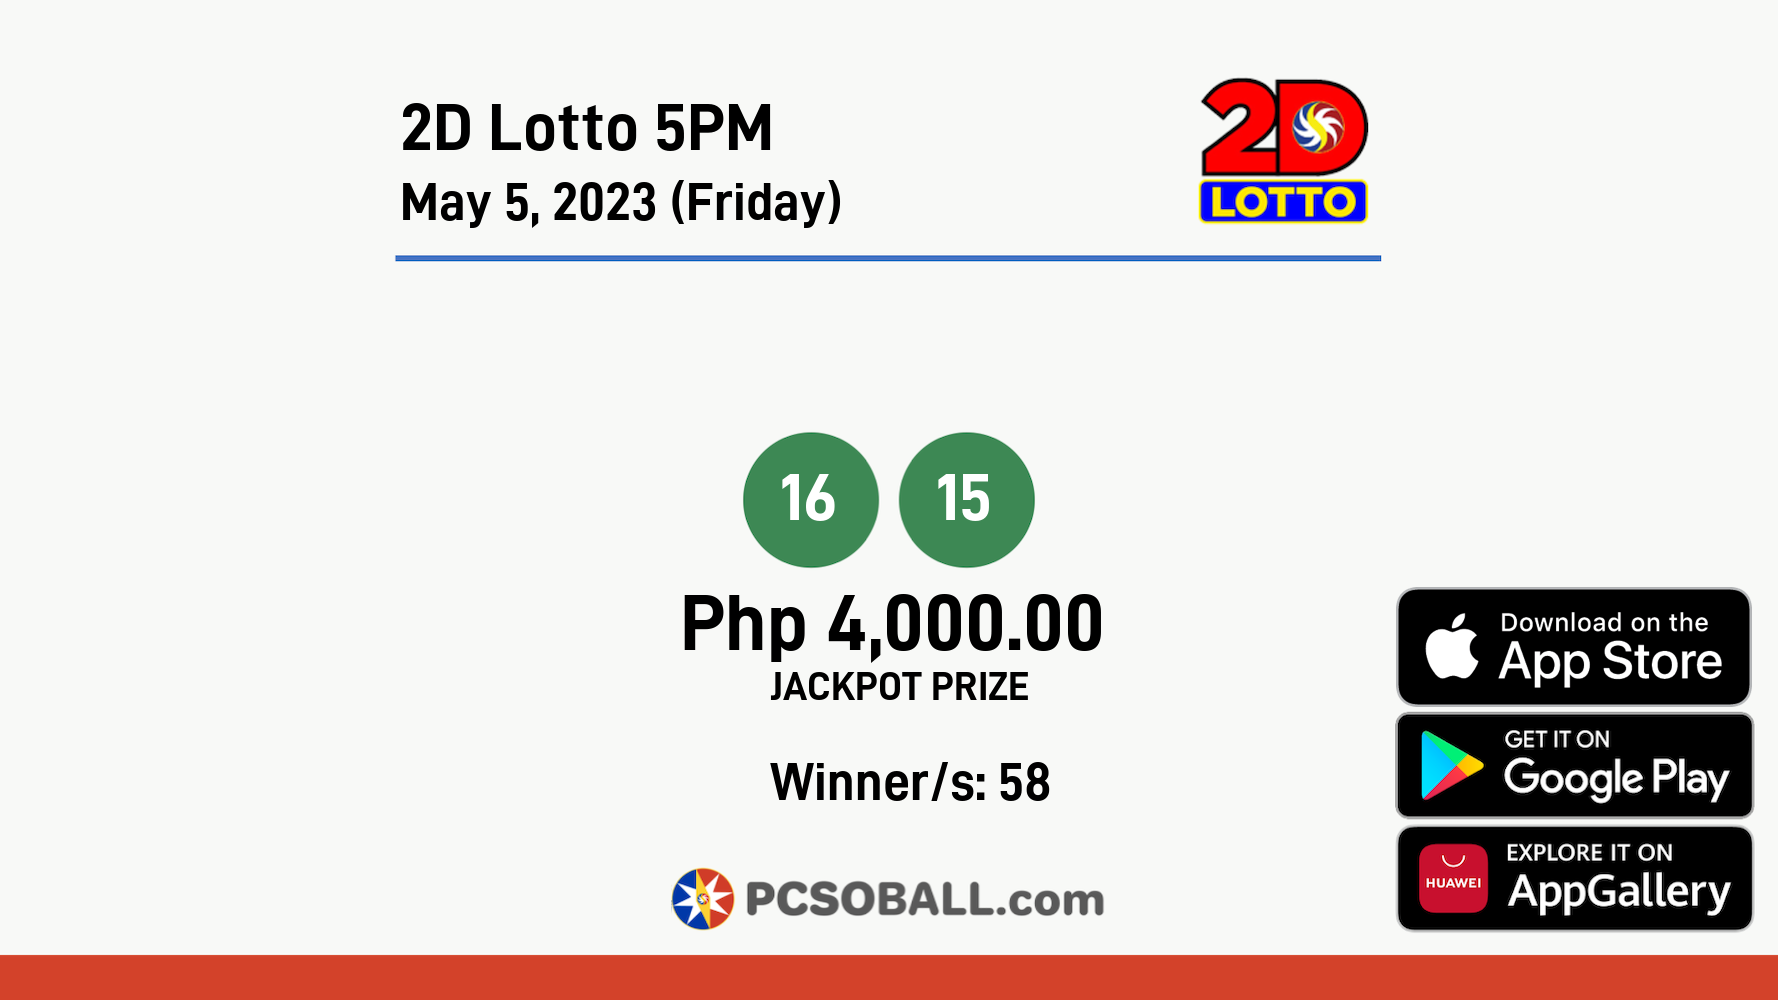 2D Lotto 5PM May 5, 2023 (Friday) Result